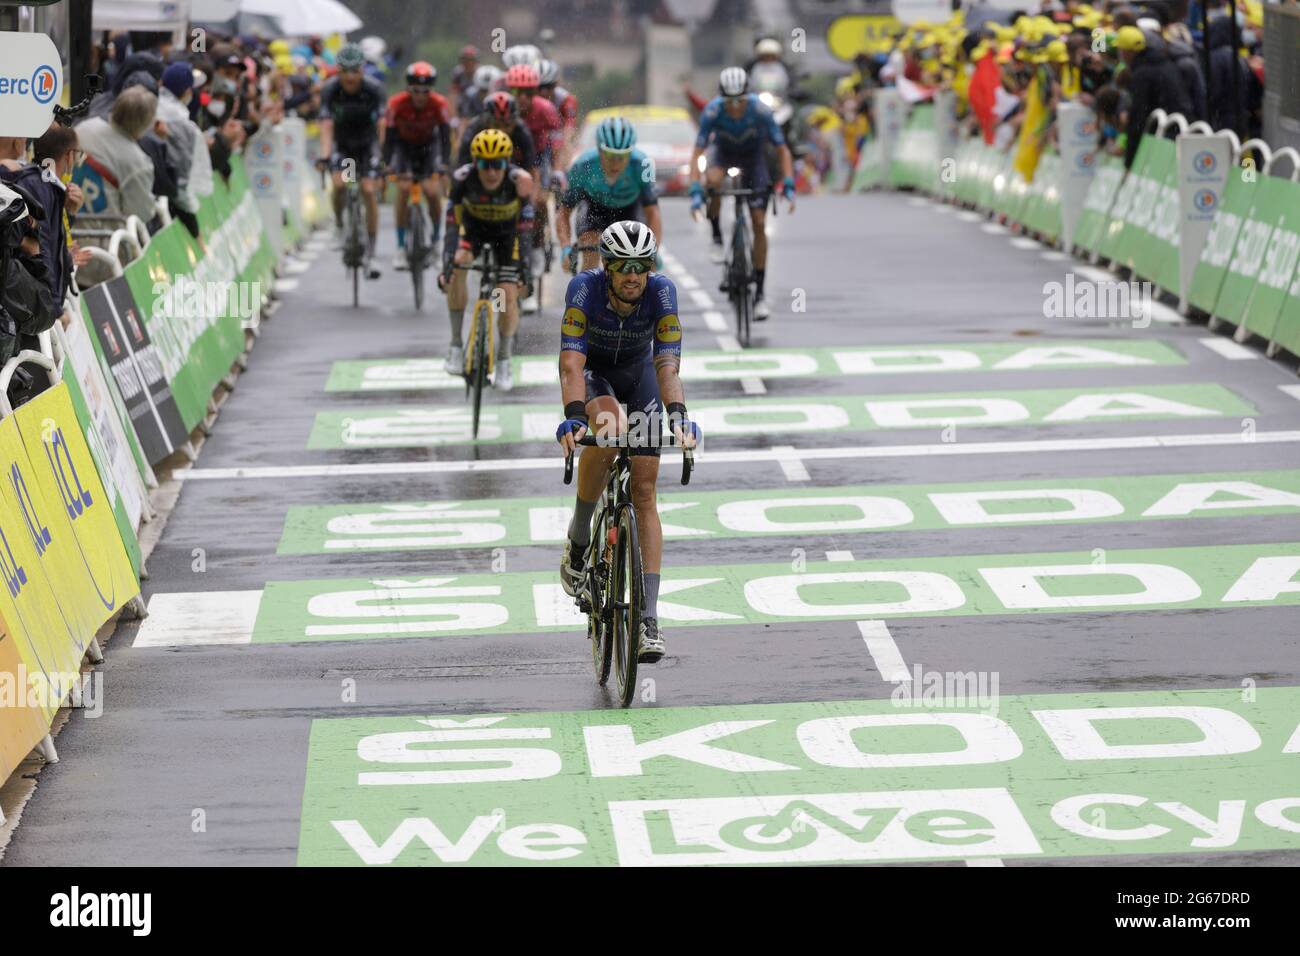 Le Grand-Bornand, France. 03 July 2021. Riders crossing the finish line of the 8th stage of the Tour de France in Le Grand-Bornand. Julian Elliott News Photography Credit: Julian Elliott/Alamy Live News Stock Photo